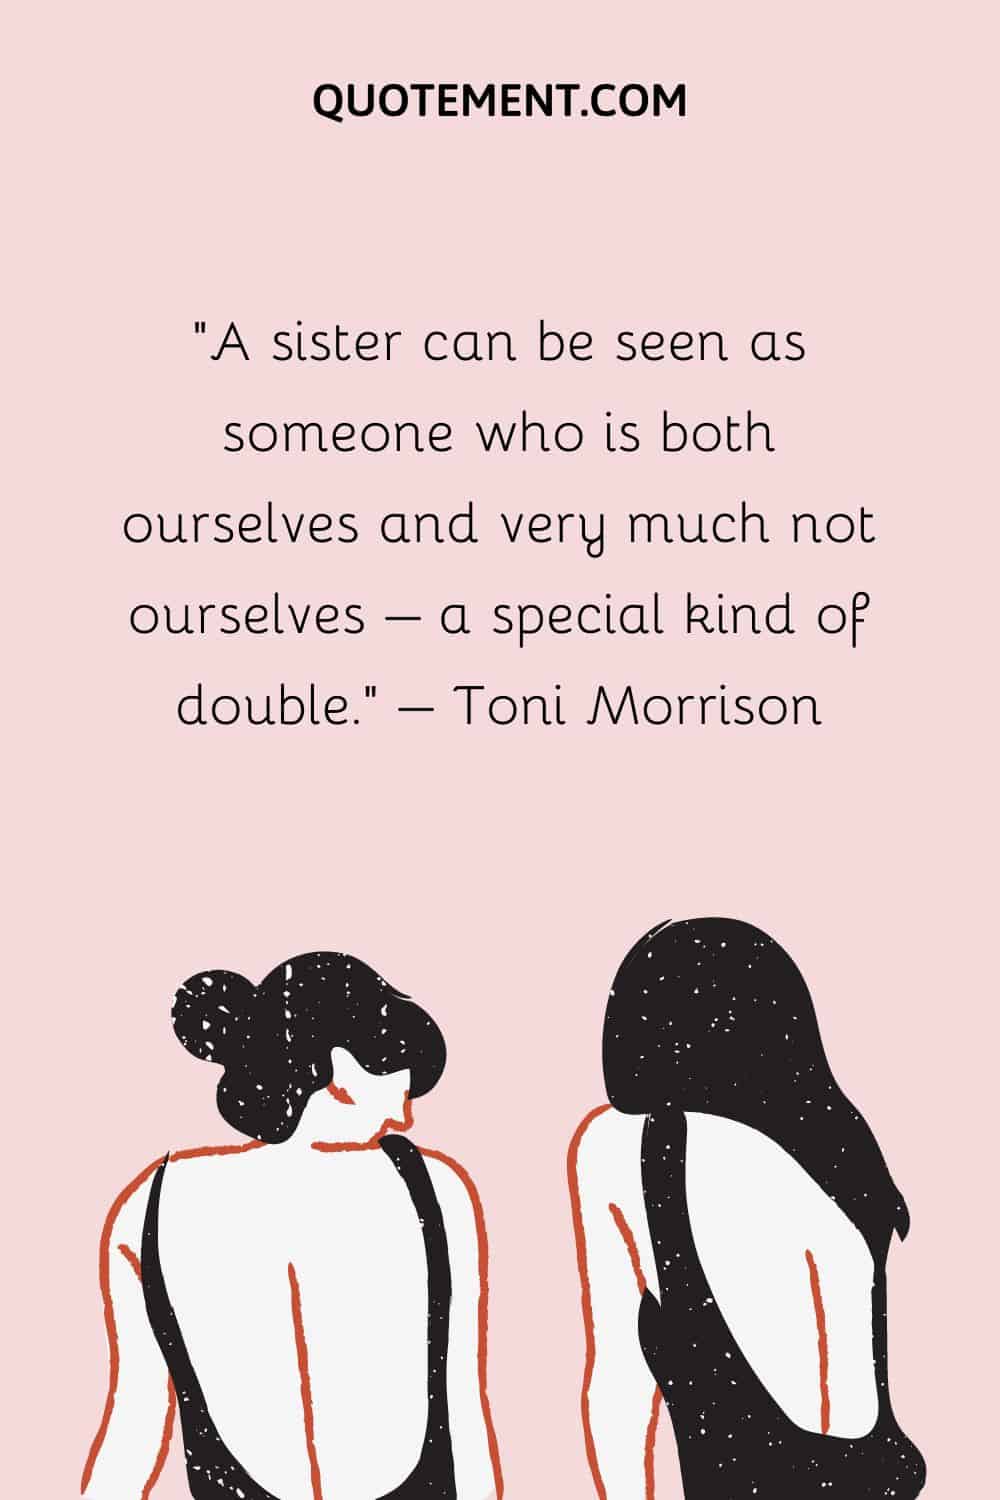 A sister can be seen as someone who is both ourselves and very much not ourselves